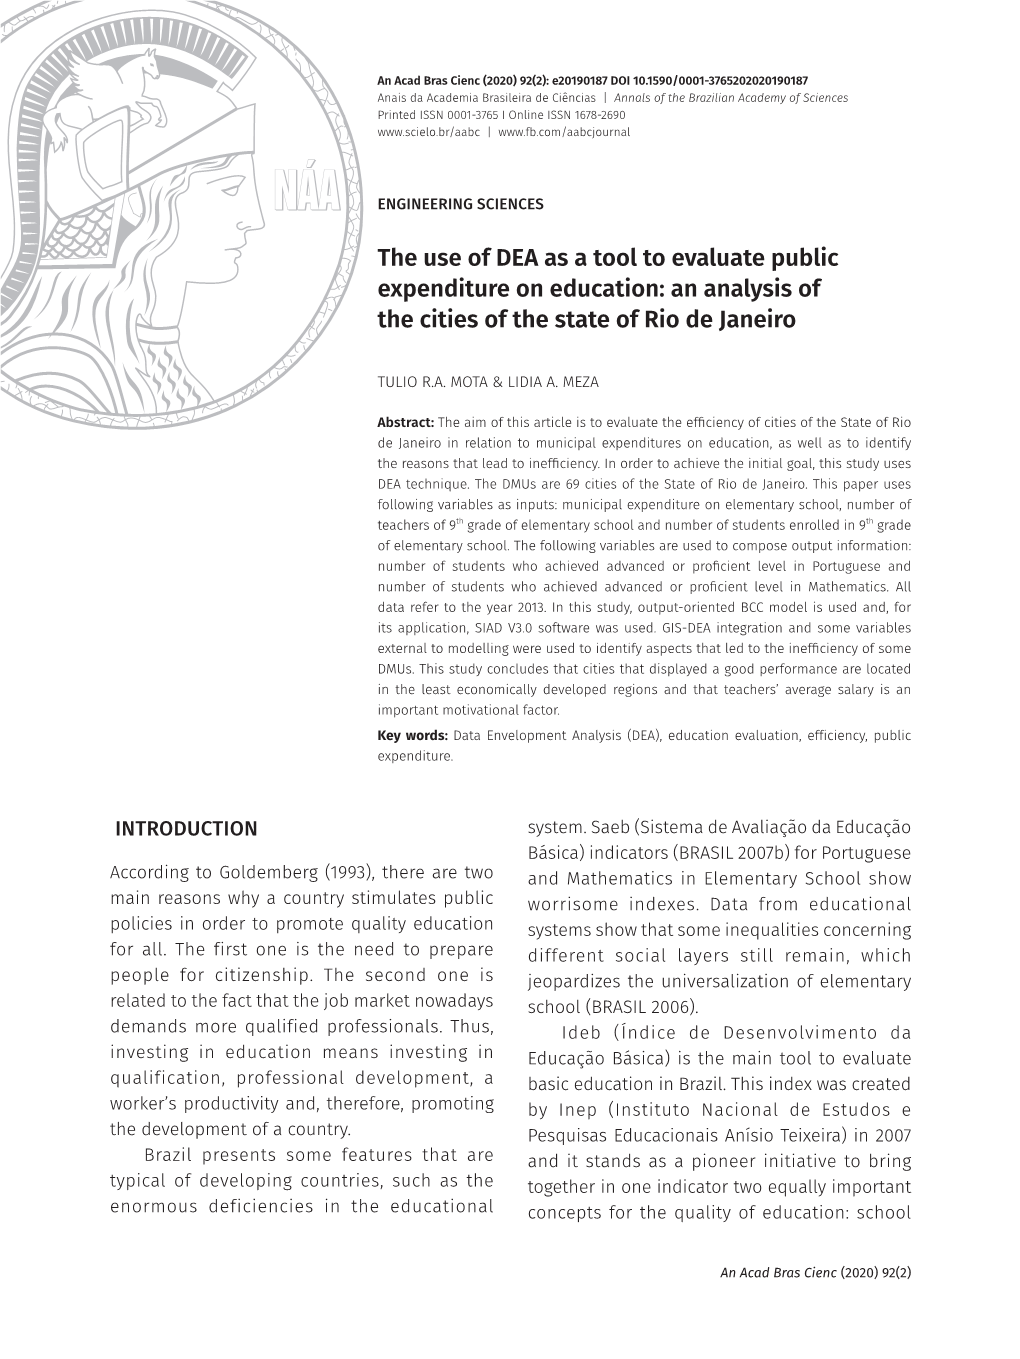 The Use of DEA As a Tool to Evaluate Public Expenditure on Education: an Analysis of the Cities of the State of Rio De Janeiro